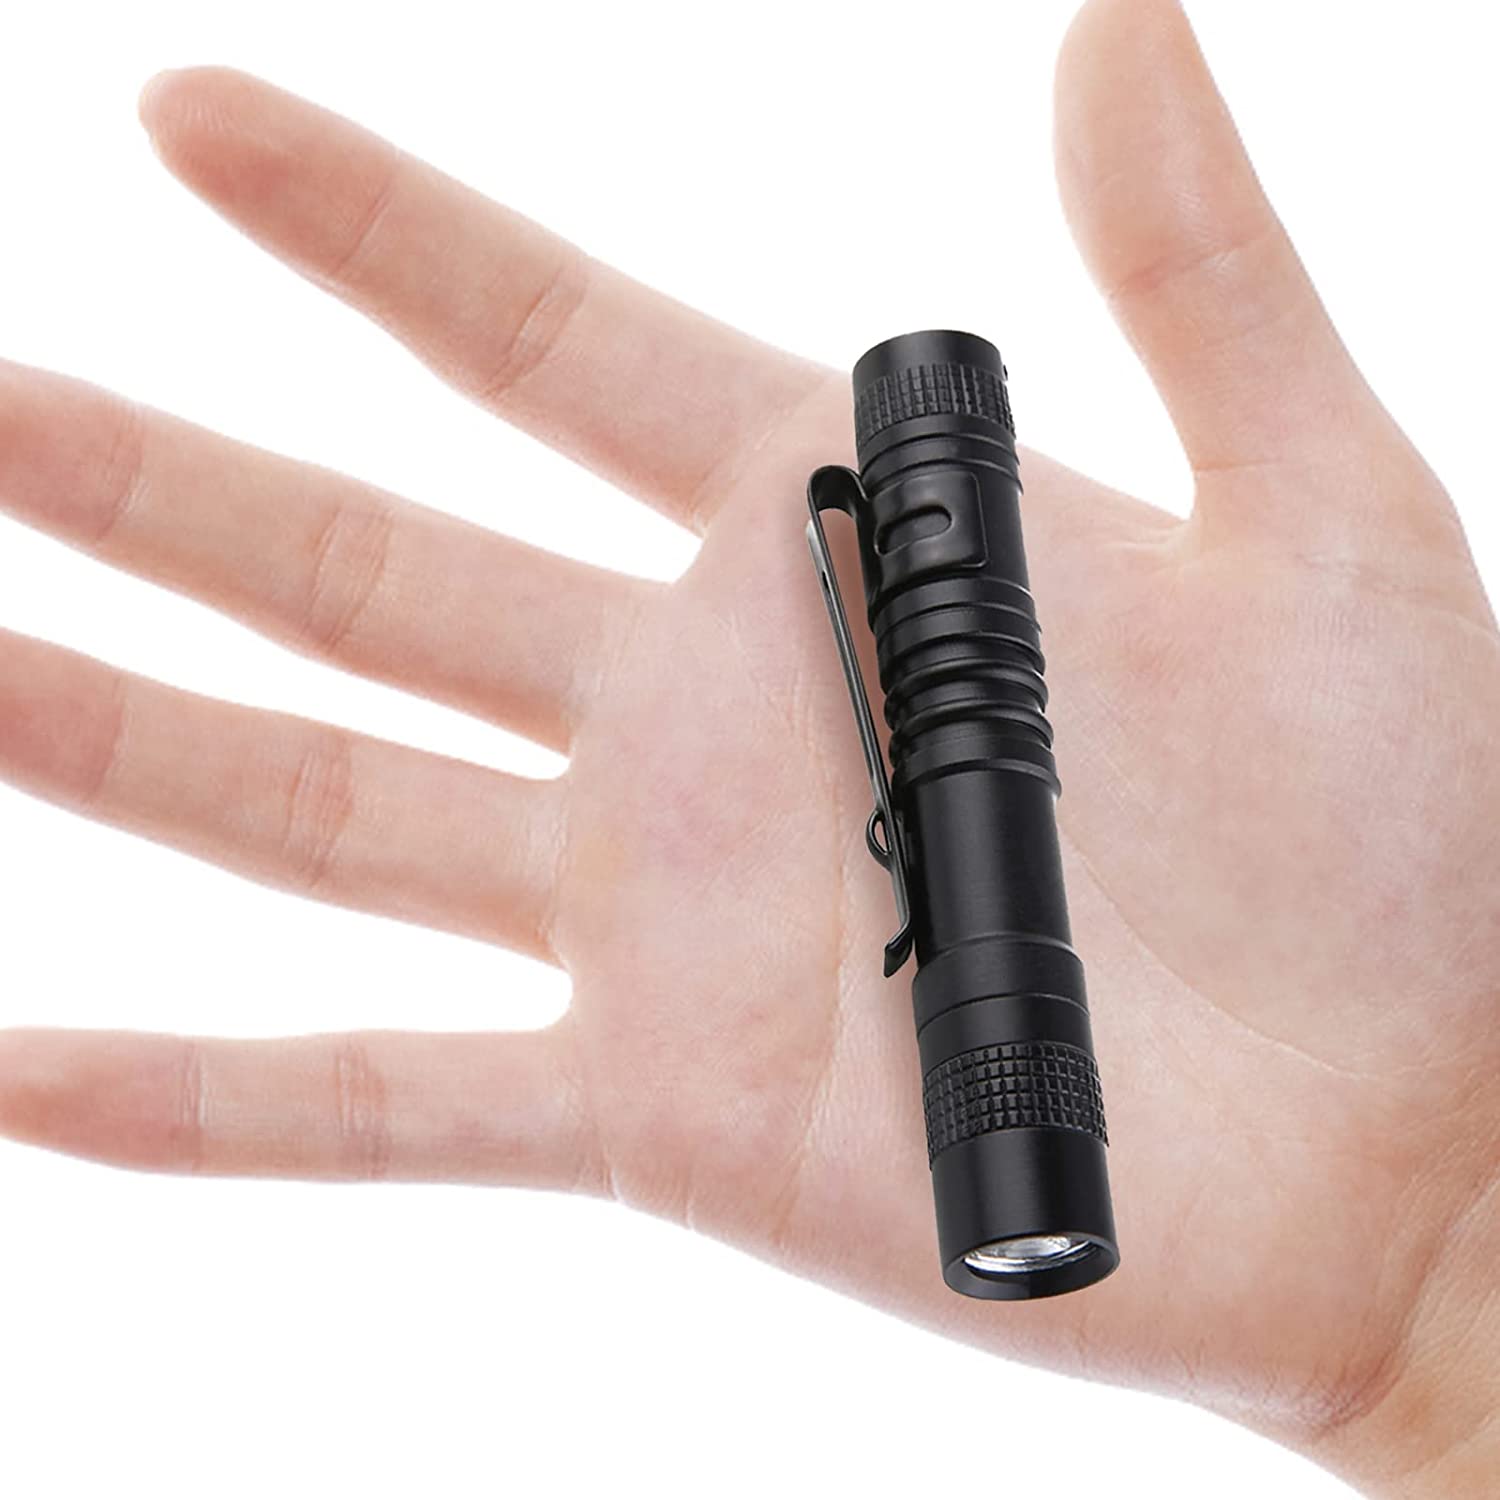 Mini Led Flashlights High Lumens Outdoor Small Tactical Flashlight Glow in The Dark 3.55 Inch Handheld Pen Light Clip for Camping Emergency Inspection Repair Battery Powered